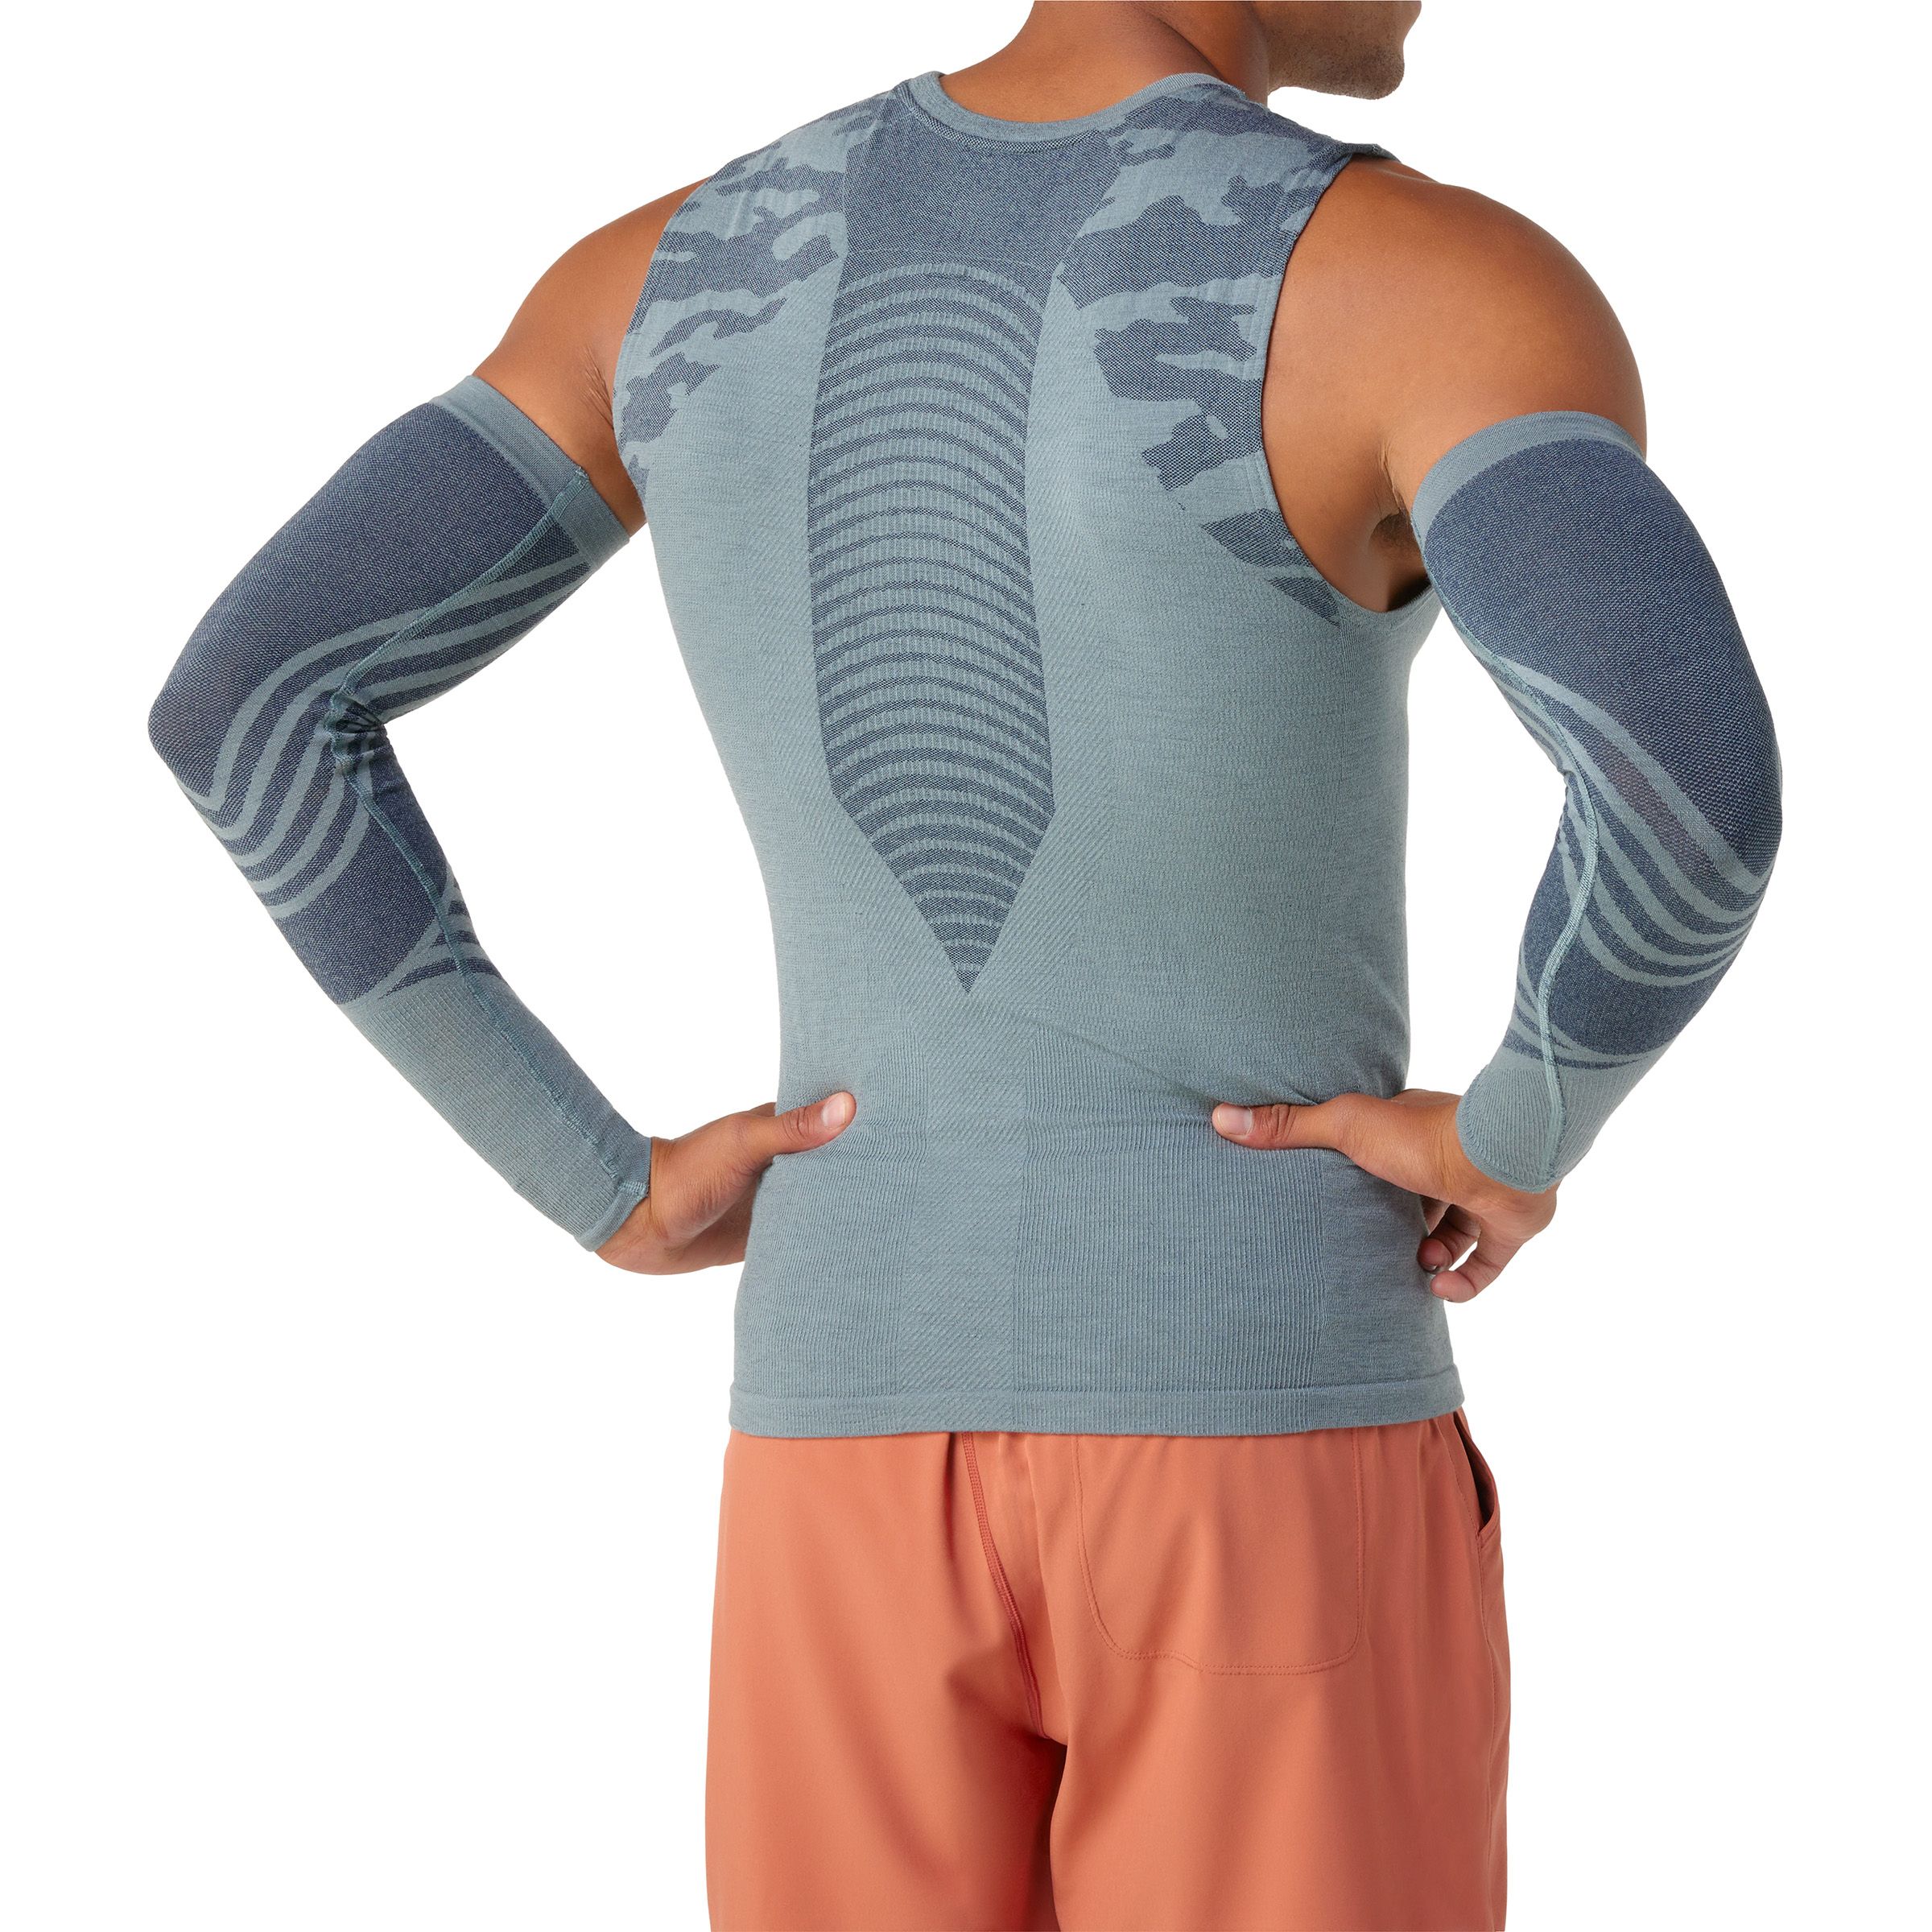 Compression Sleeves For Arms  Medi Flat Knit Combination Sleeve